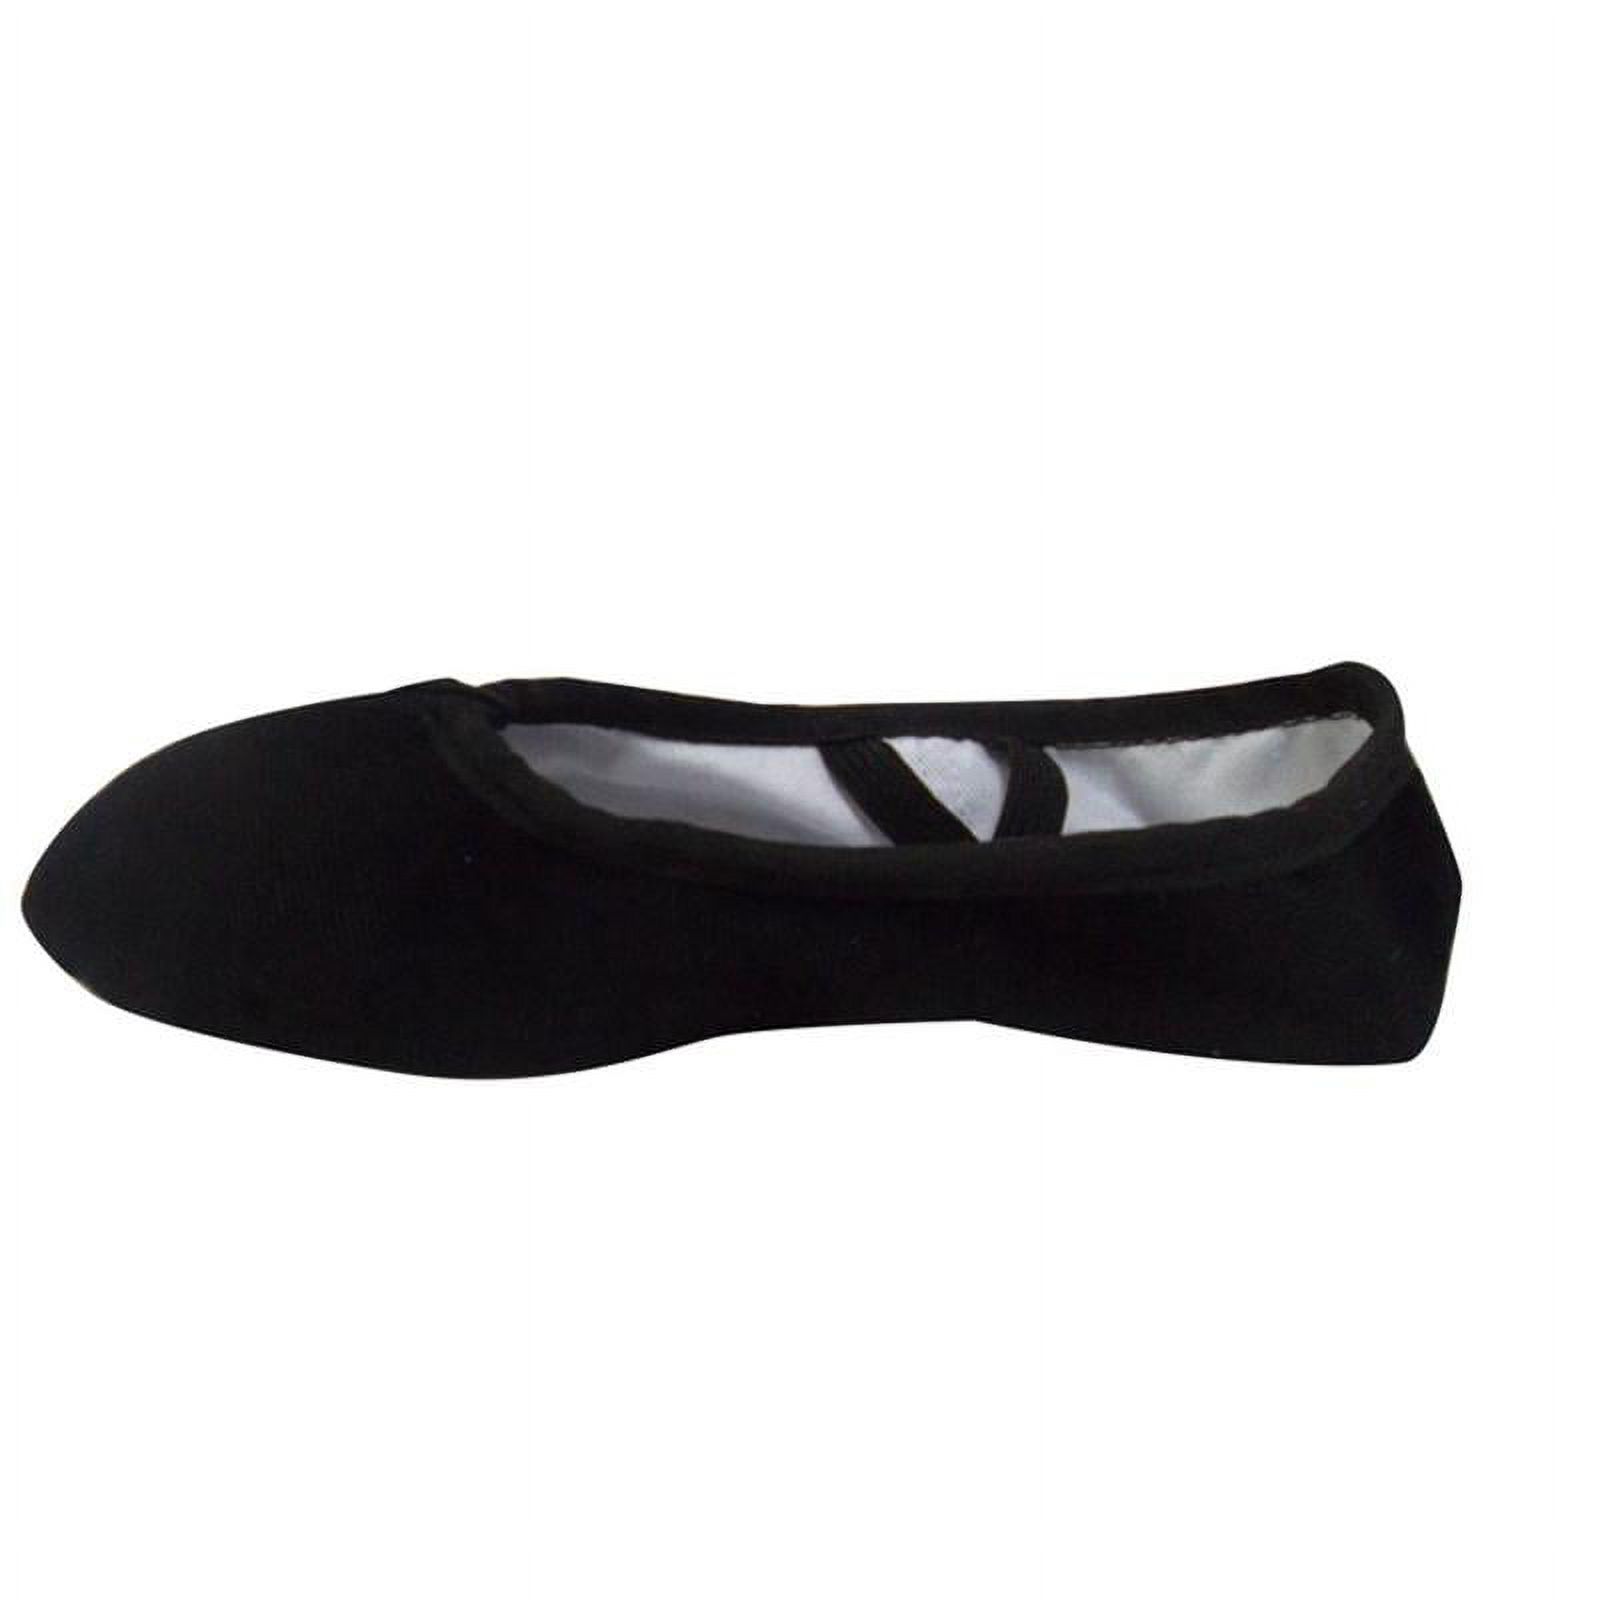 MELLCO Ballet Shoes for Women Girls, Women's Ballet Slipper Dance Shoes Canvas Ballet Shoes Yoga Shoes - image 3 of 3